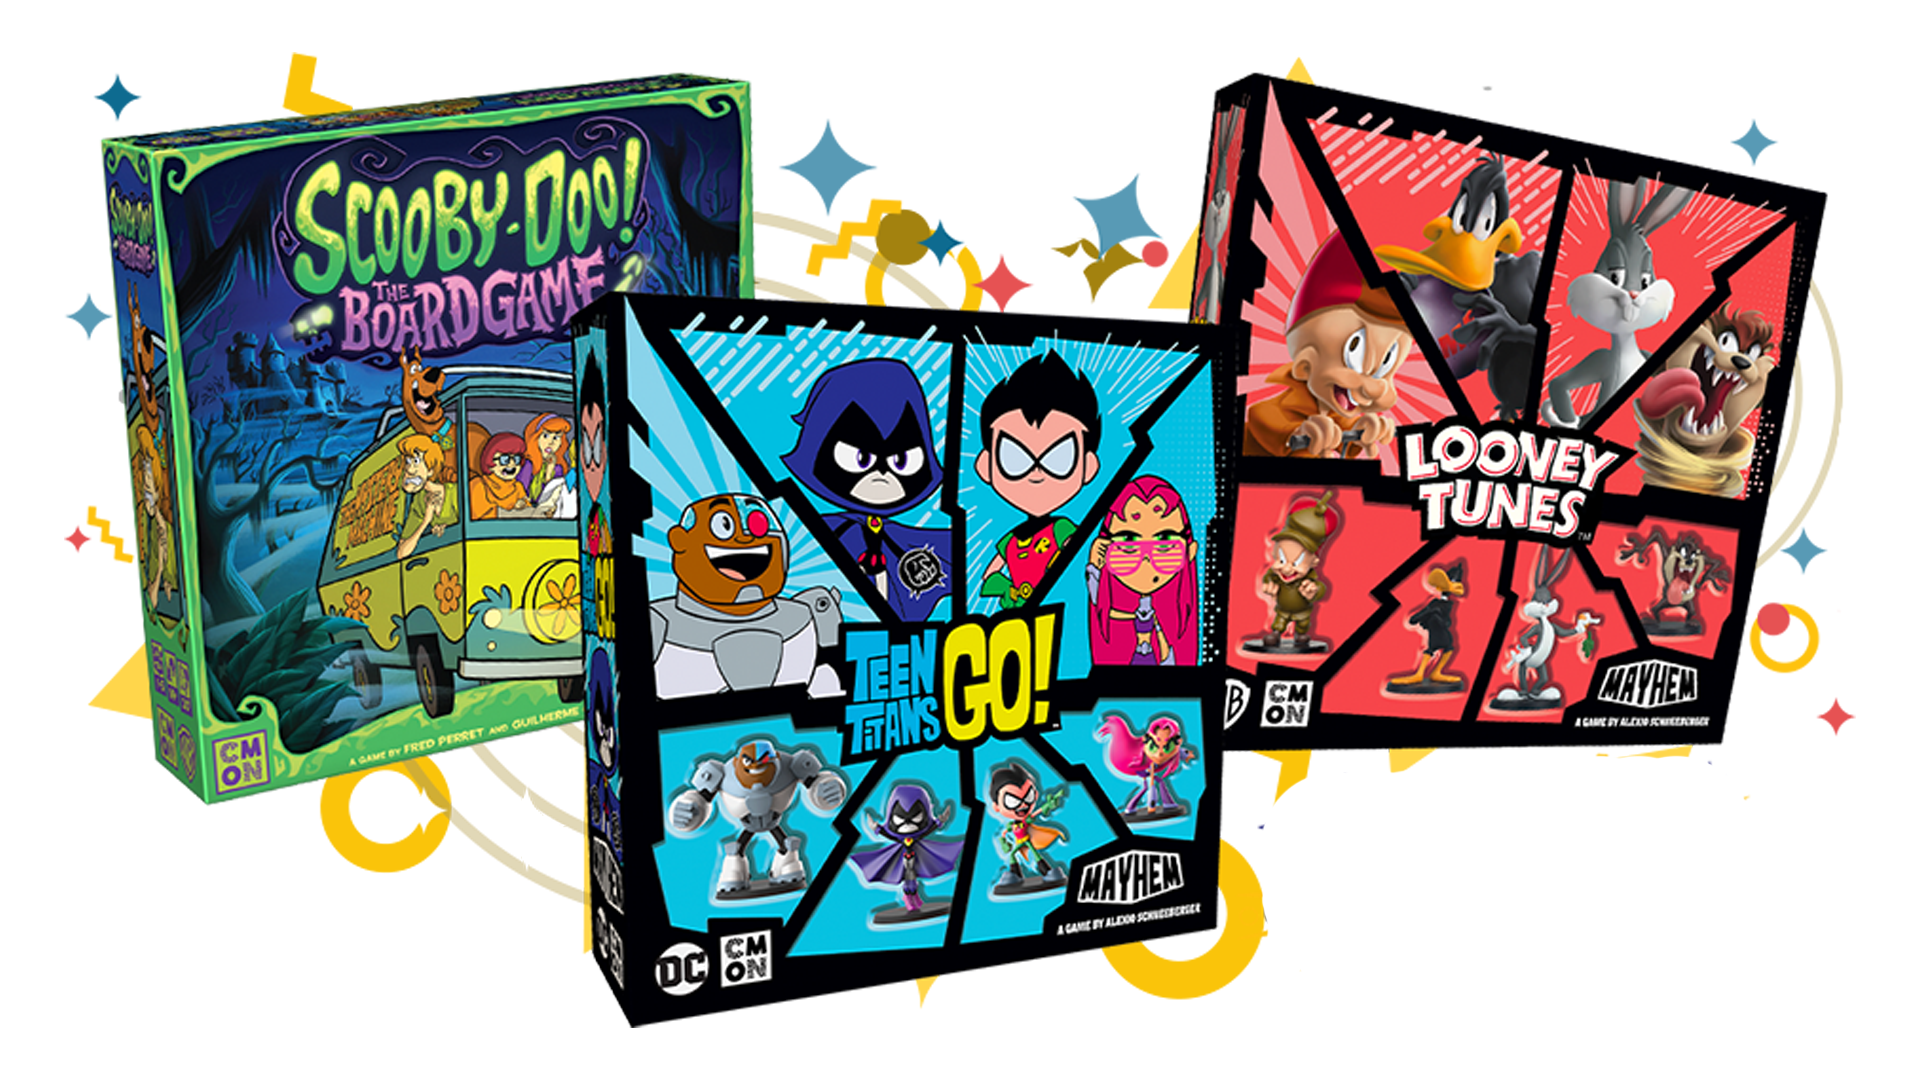 Scooby-Doo, Looney Tunes and Teen Titans GO! star in cartoon collection